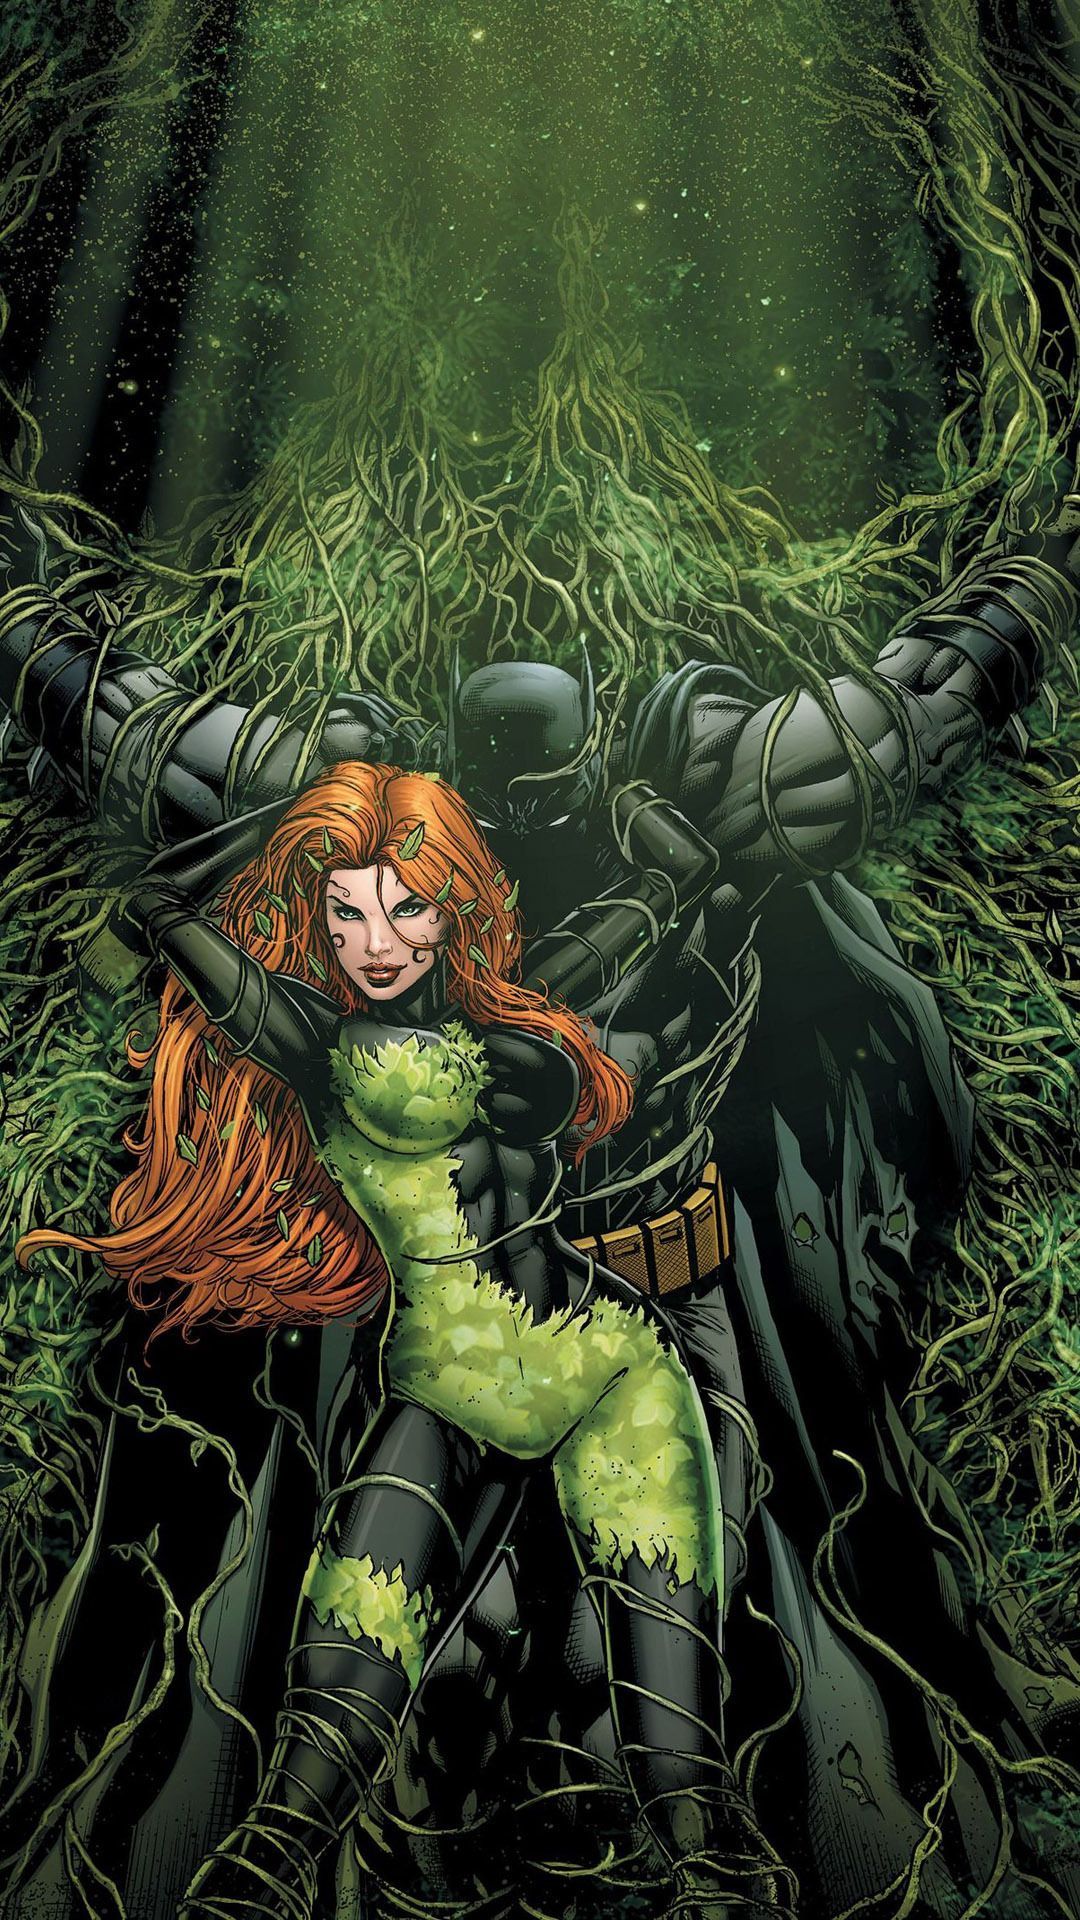 Poison Ivy Wallpaper. Lily Ivy Wallpaper, Poison Ivy Arkham Wallpaper and Poison Ivy Wallpaper